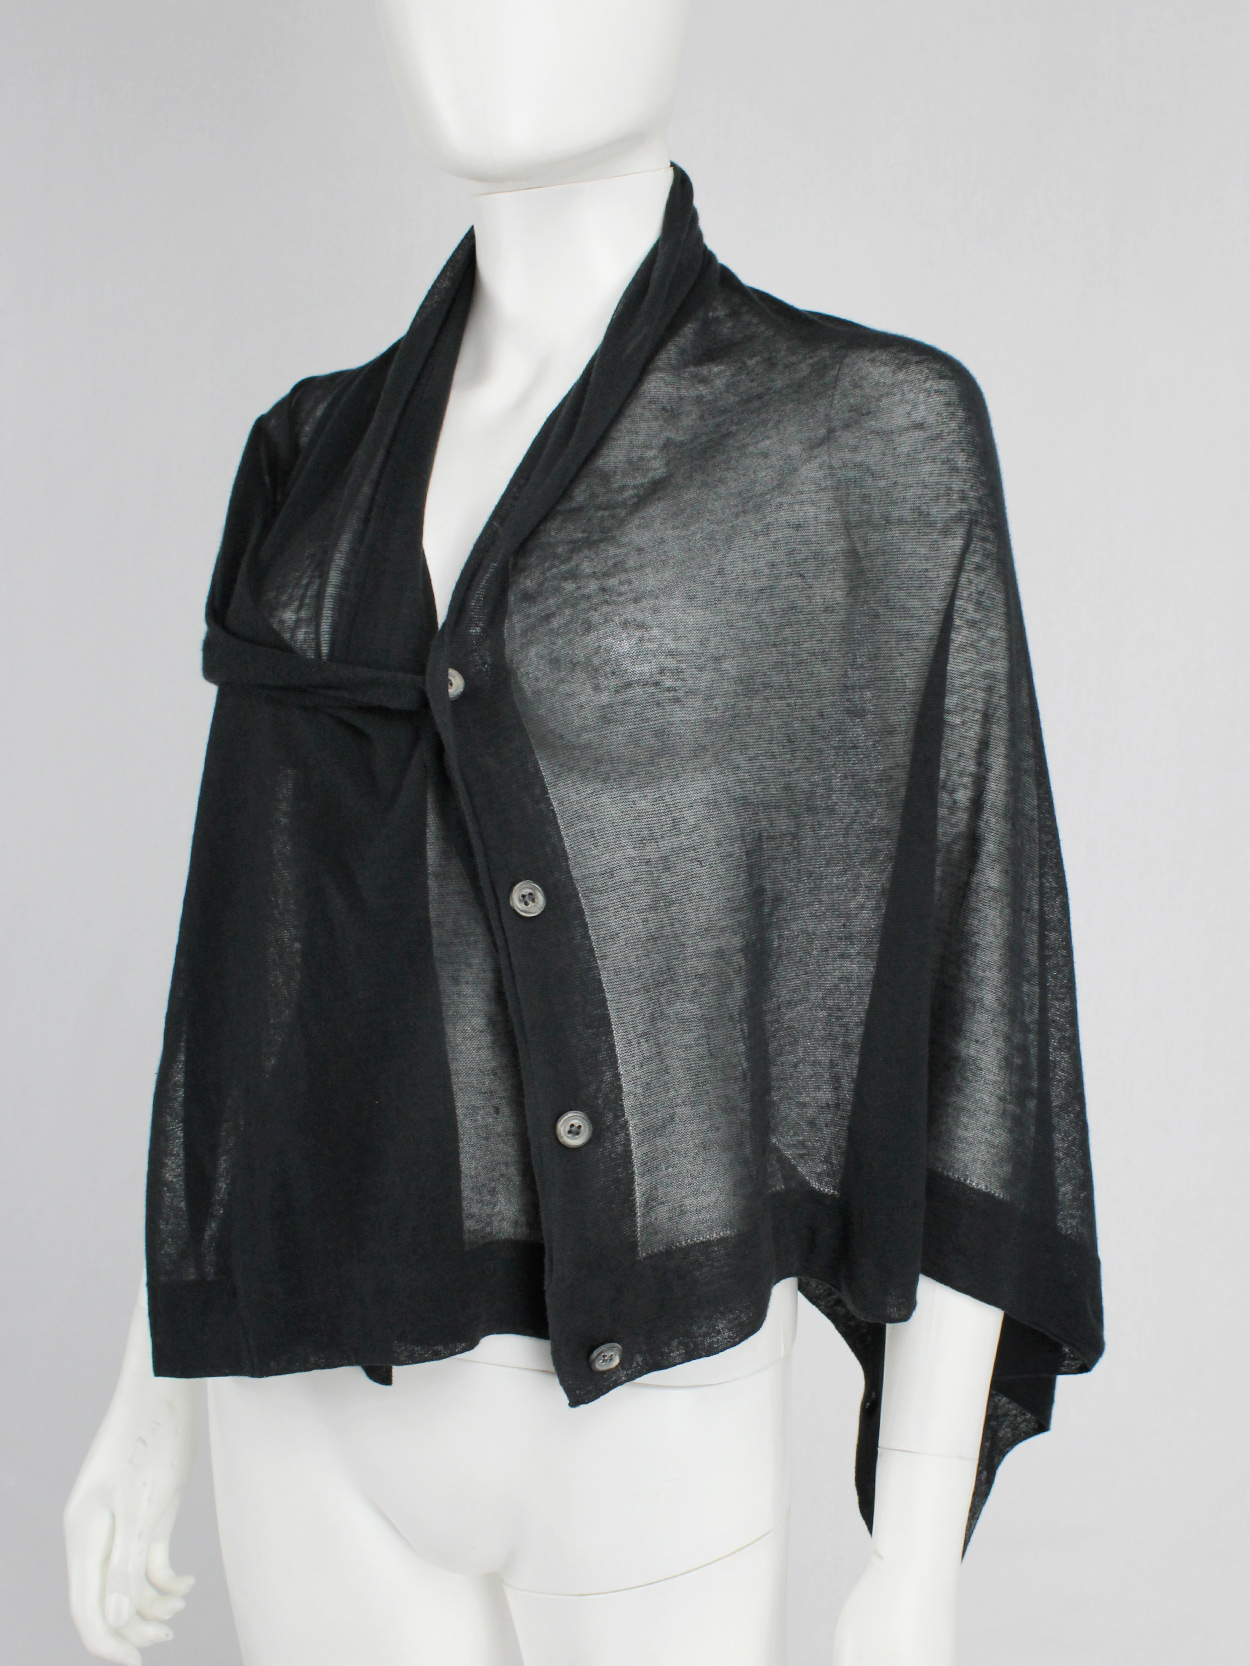 Ann Demeulemeester black convertible scarf with buttons - V A N II T A S